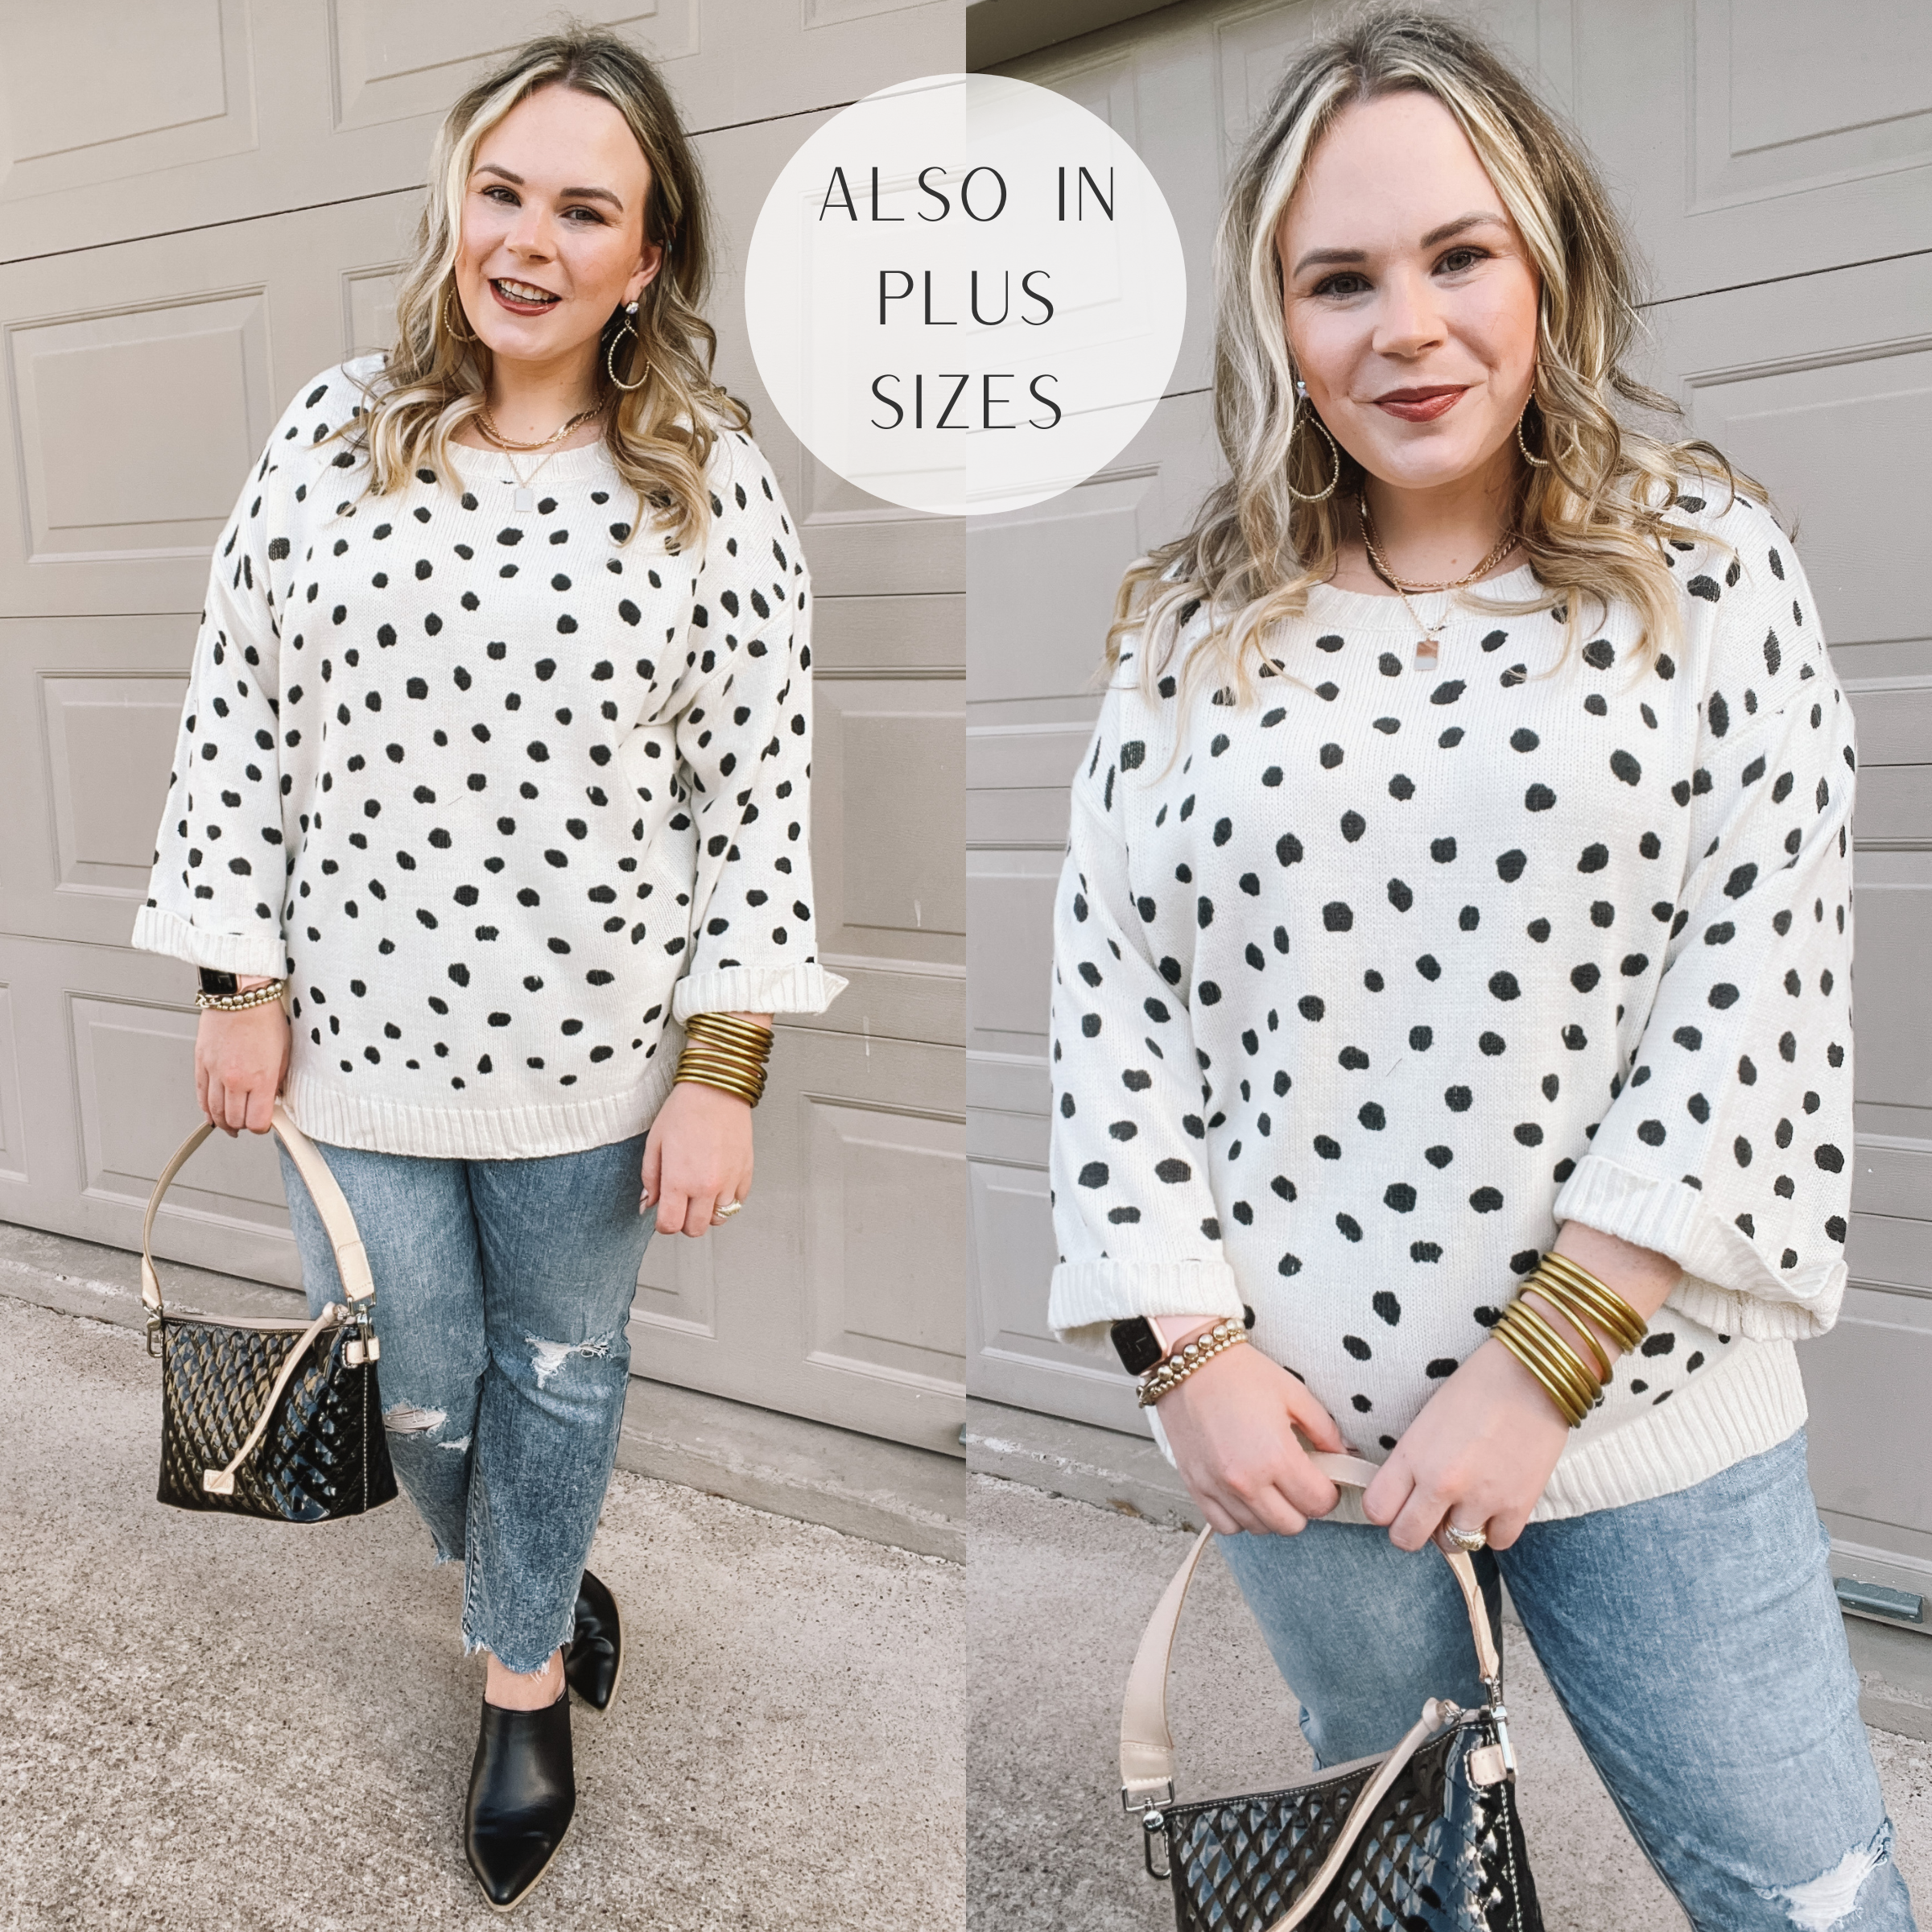 Iced Latte Love Wide 3/4 Sleeve Polka Dot Sweater in Ivory - Giddy Up Glamour Boutique